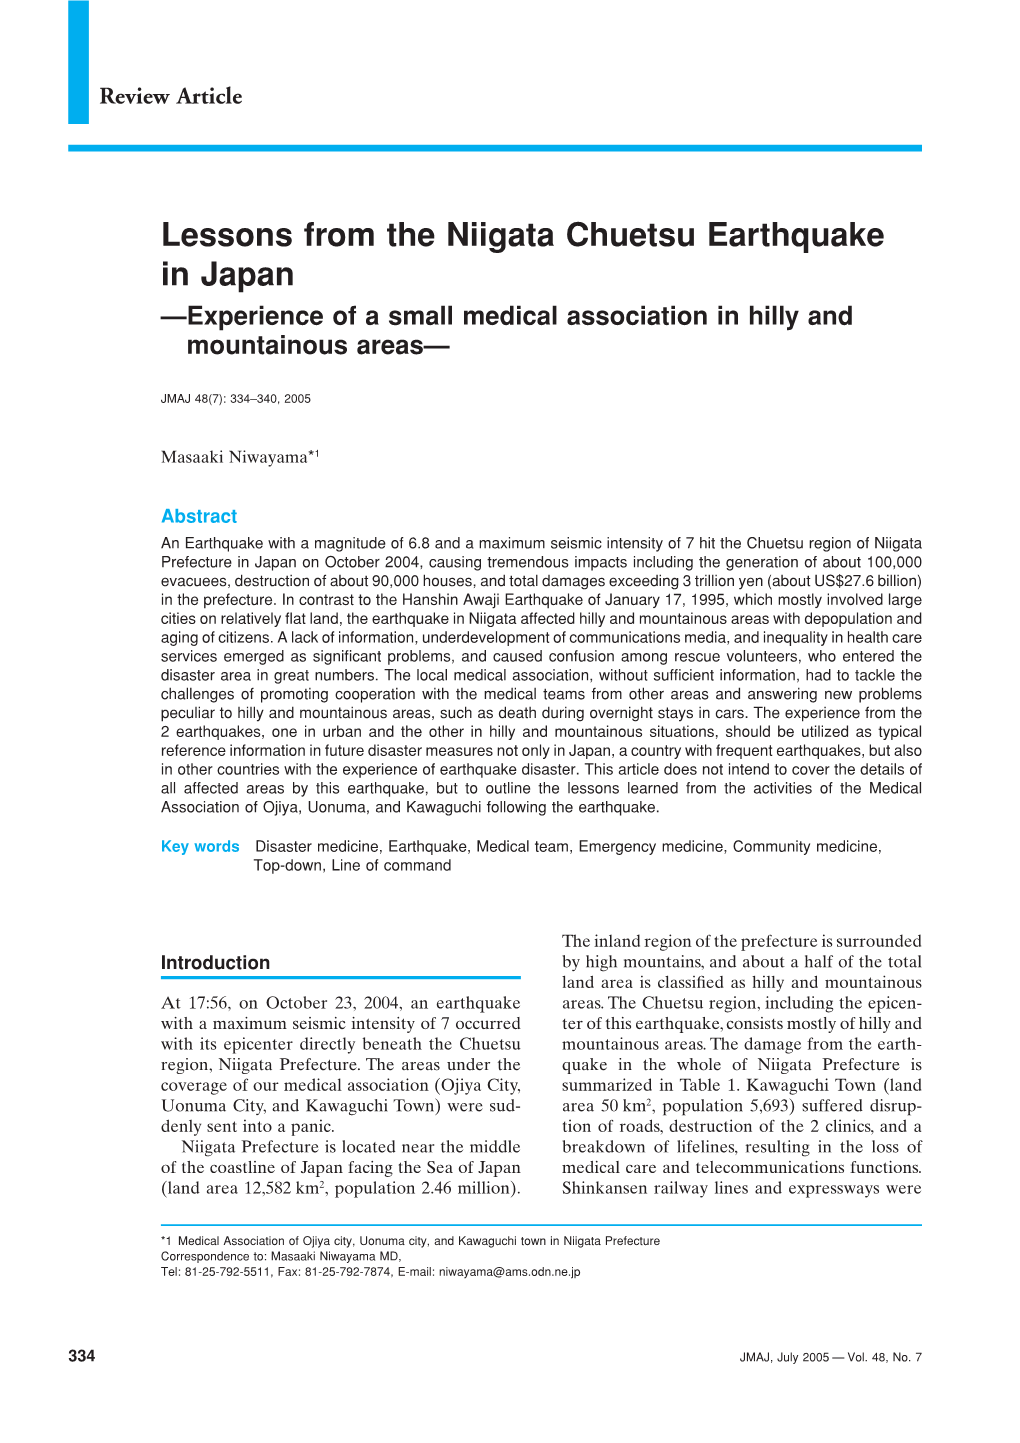 Lessons from the Niigata Chuetsu Earthquake in Japan —Experience of a Small Medical Association in Hilly and Mountainous Areas—